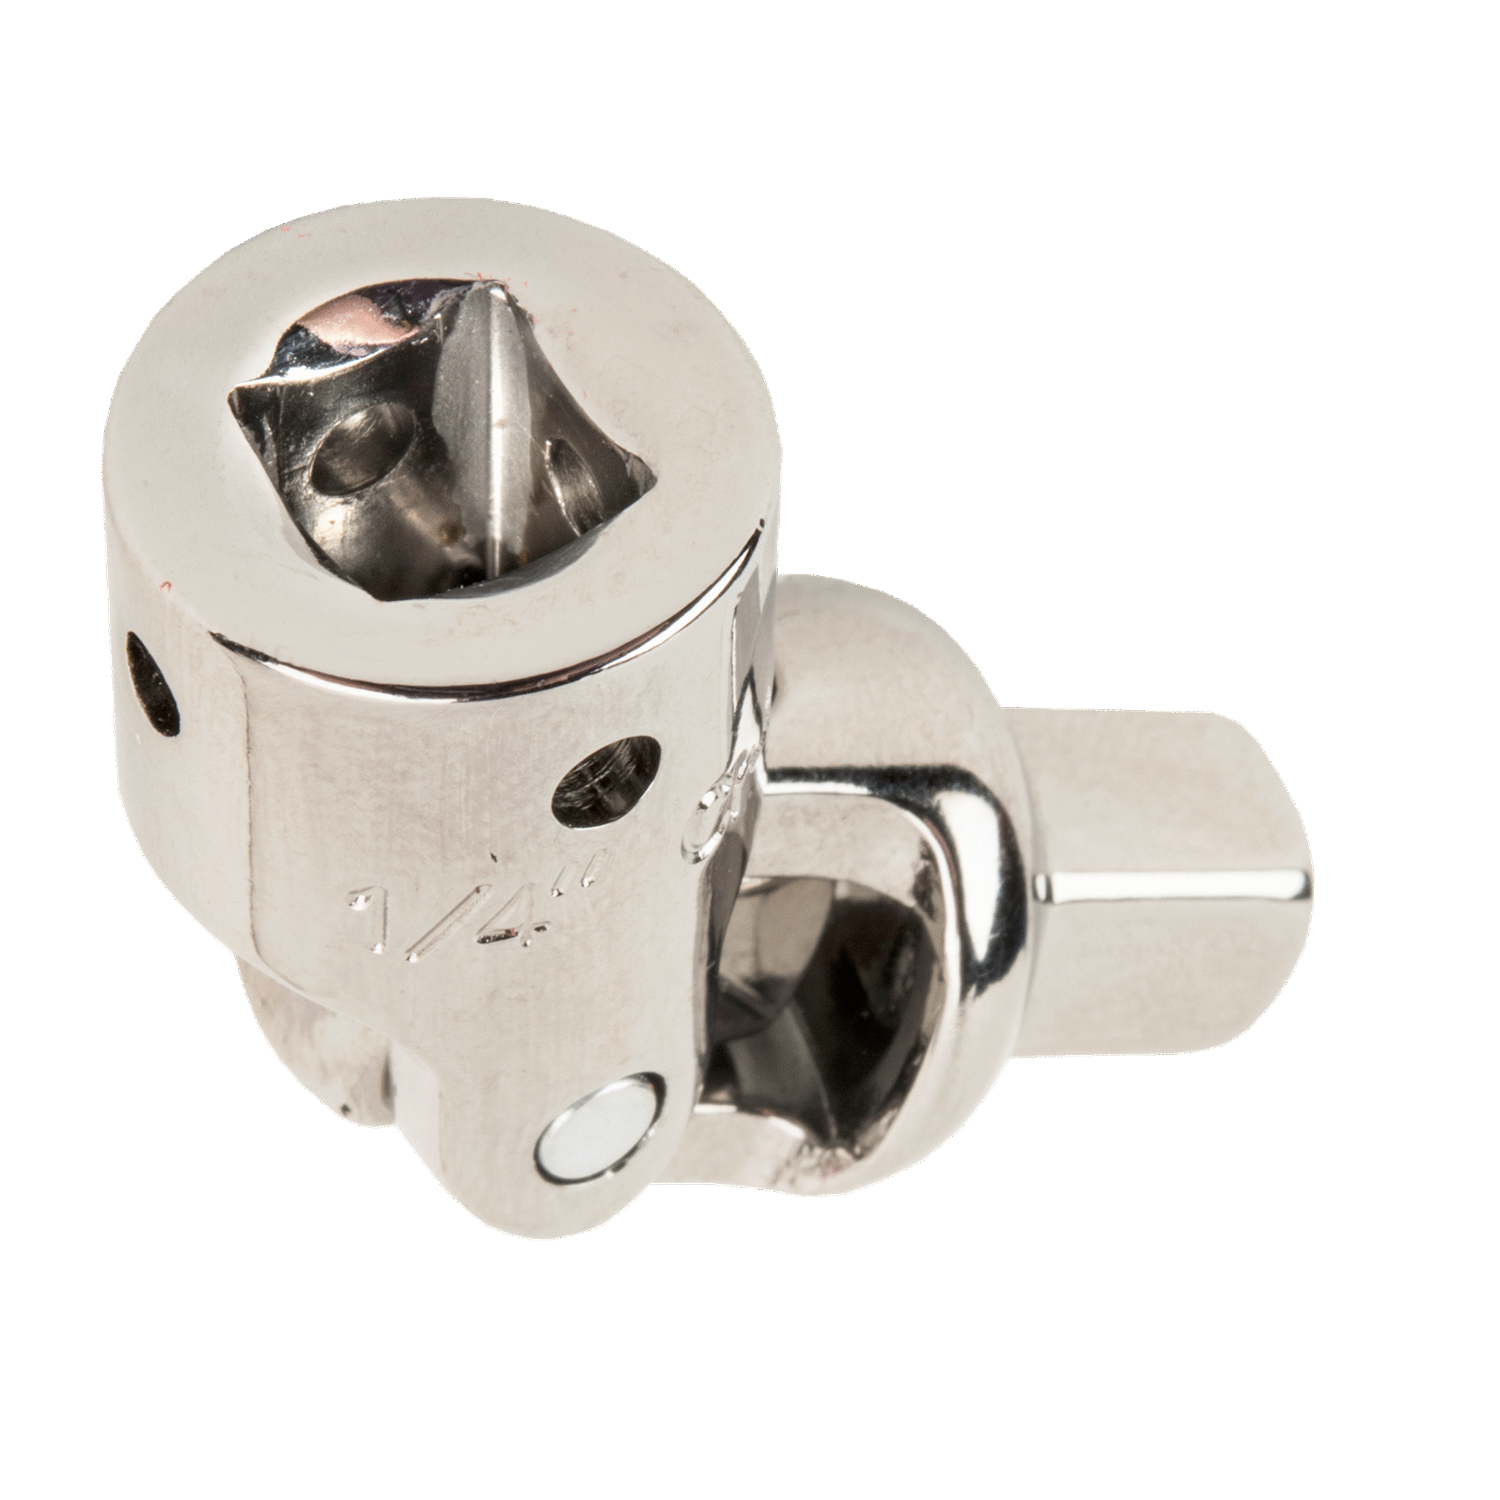 BAHCO TAH6966 1/4” Square Drive Universal Joint with 4 Holes - Premium Universal Joint from BAHCO - Shop now at Yew Aik.